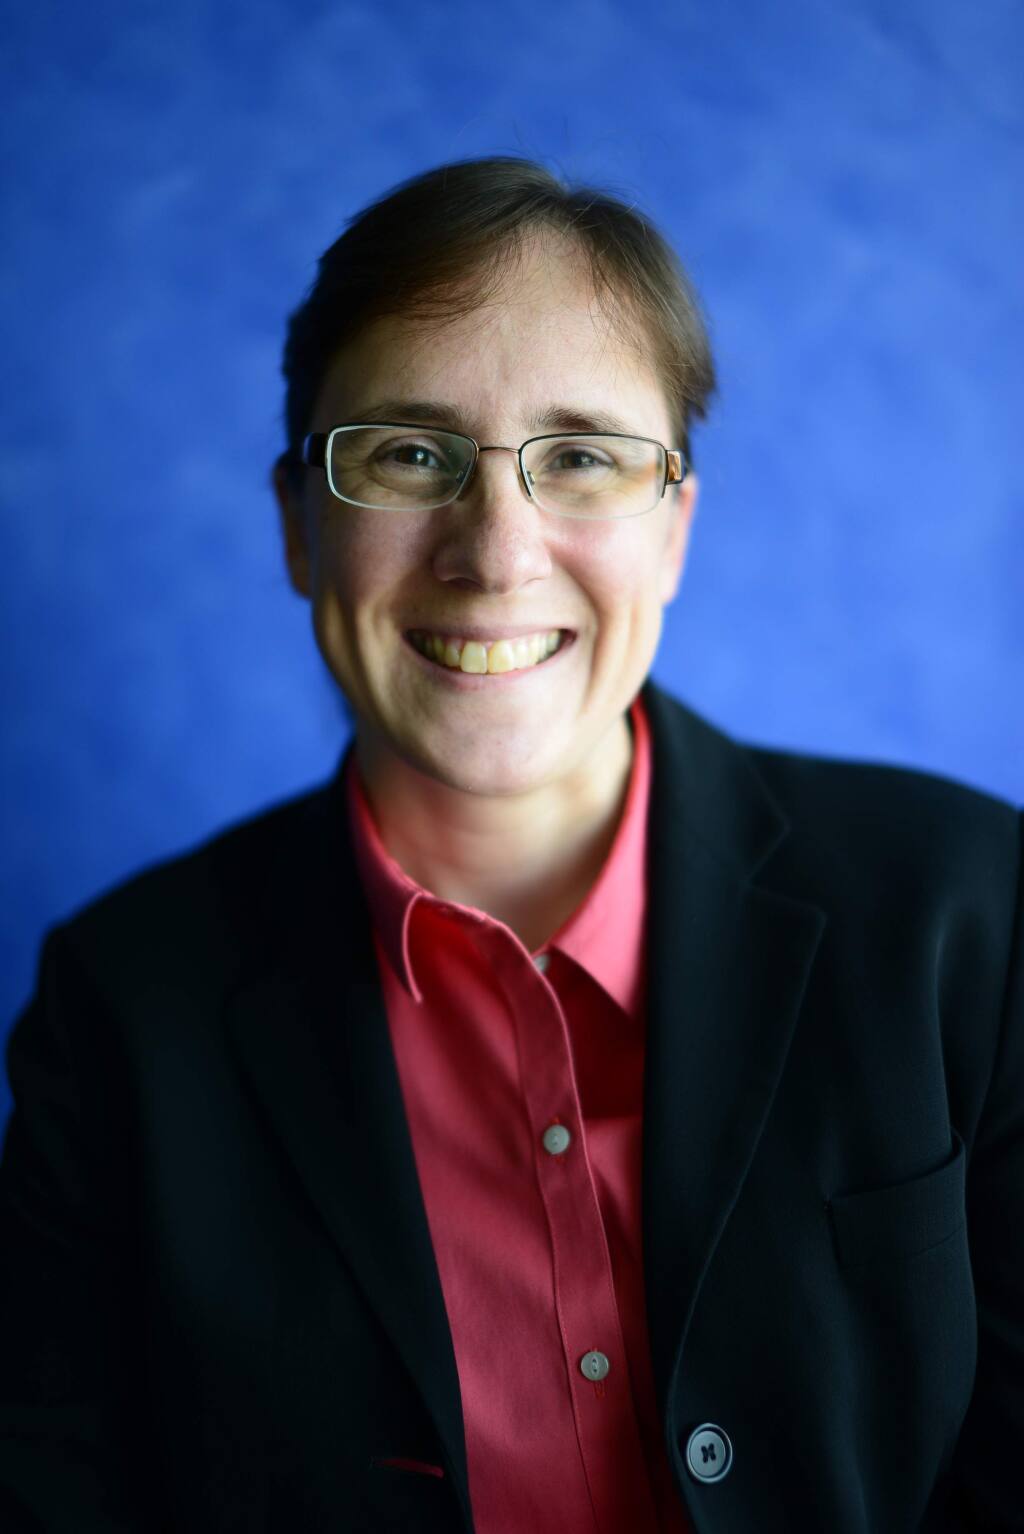 Liz Ruetsch, director of worldwide sales and services for EEsof EDA, Keysight Technologies, Santa Rosa, is a 2019 winner of North Bay Business Journal's Women in Business Awards. (courtesy photo)